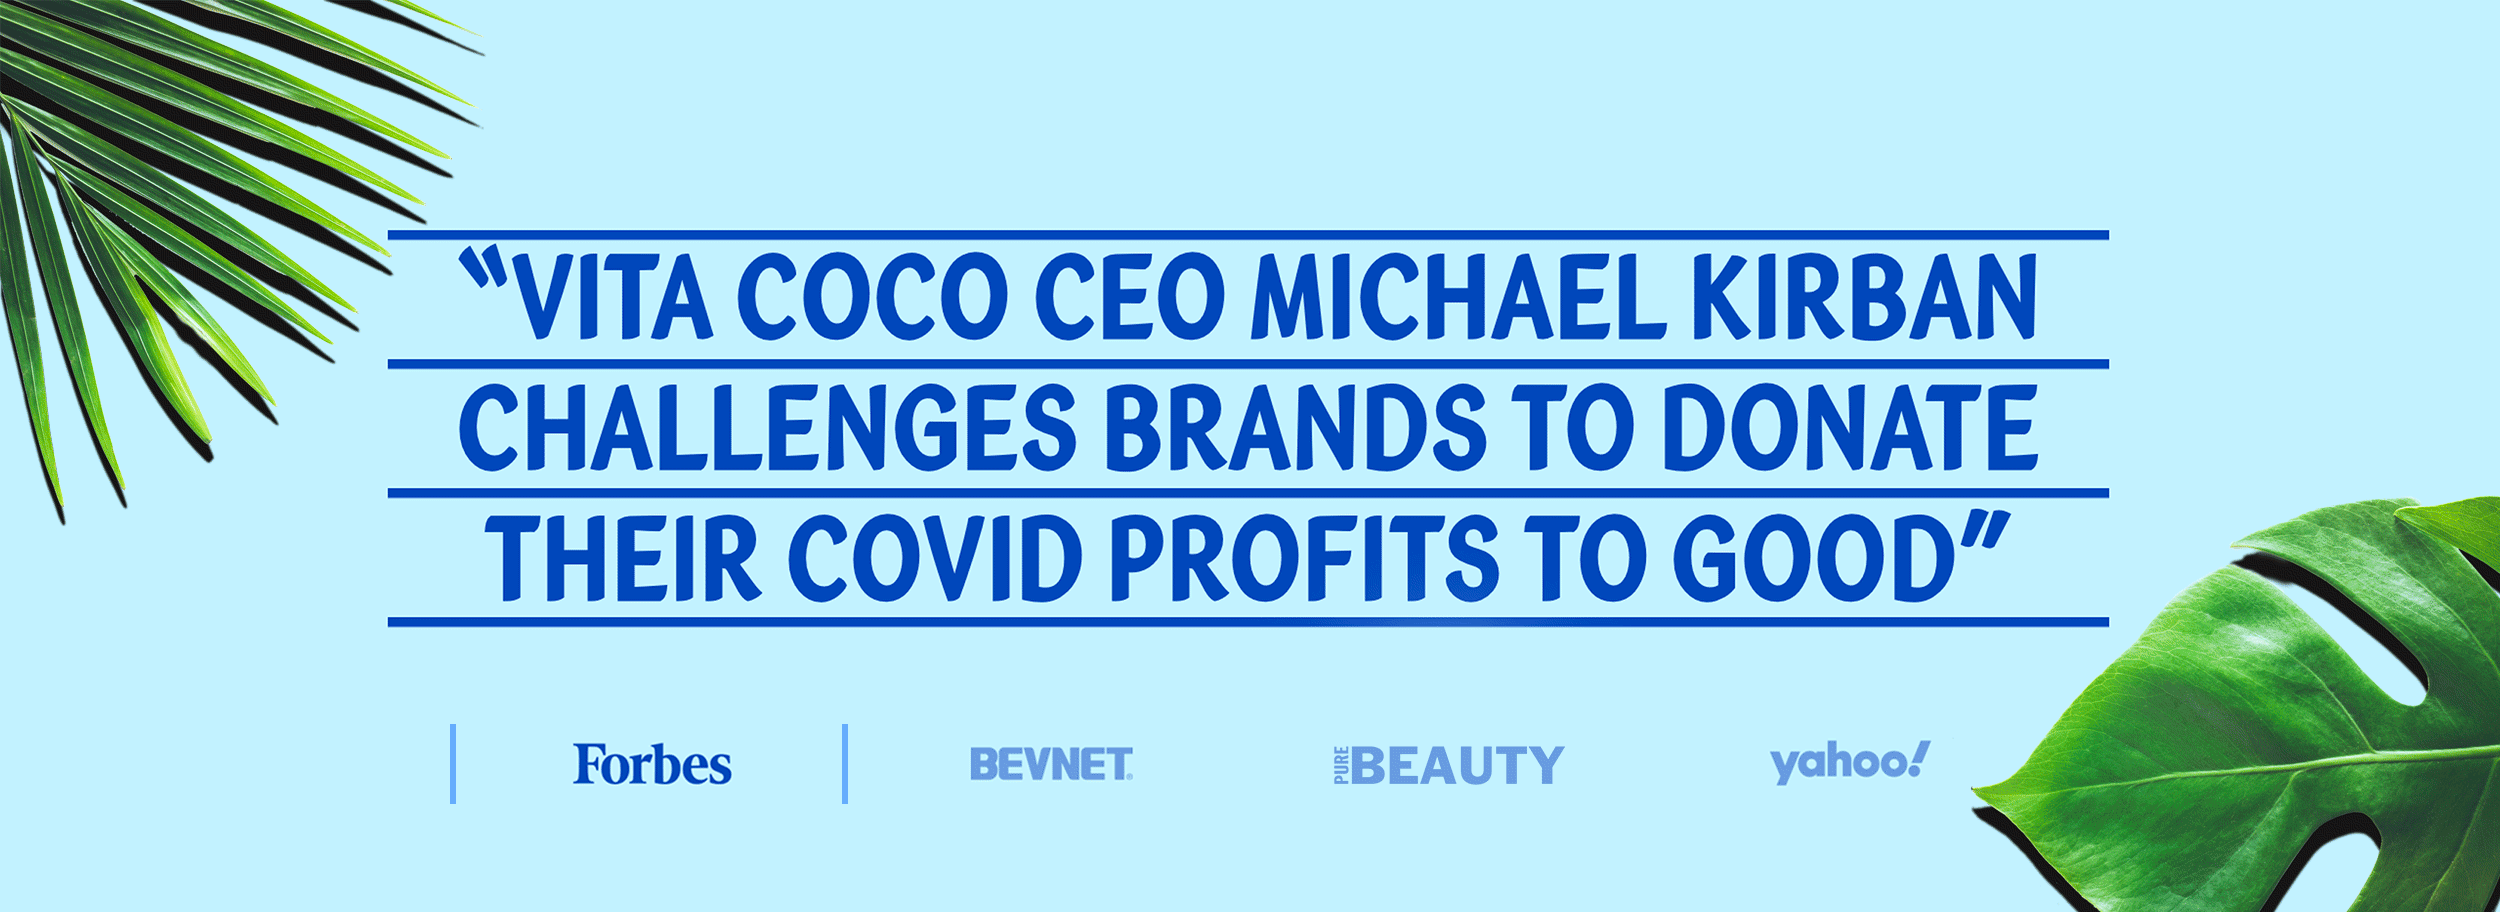 Vita Coco CEO micheal kirban challenges brands to donate their Covid profits to good.